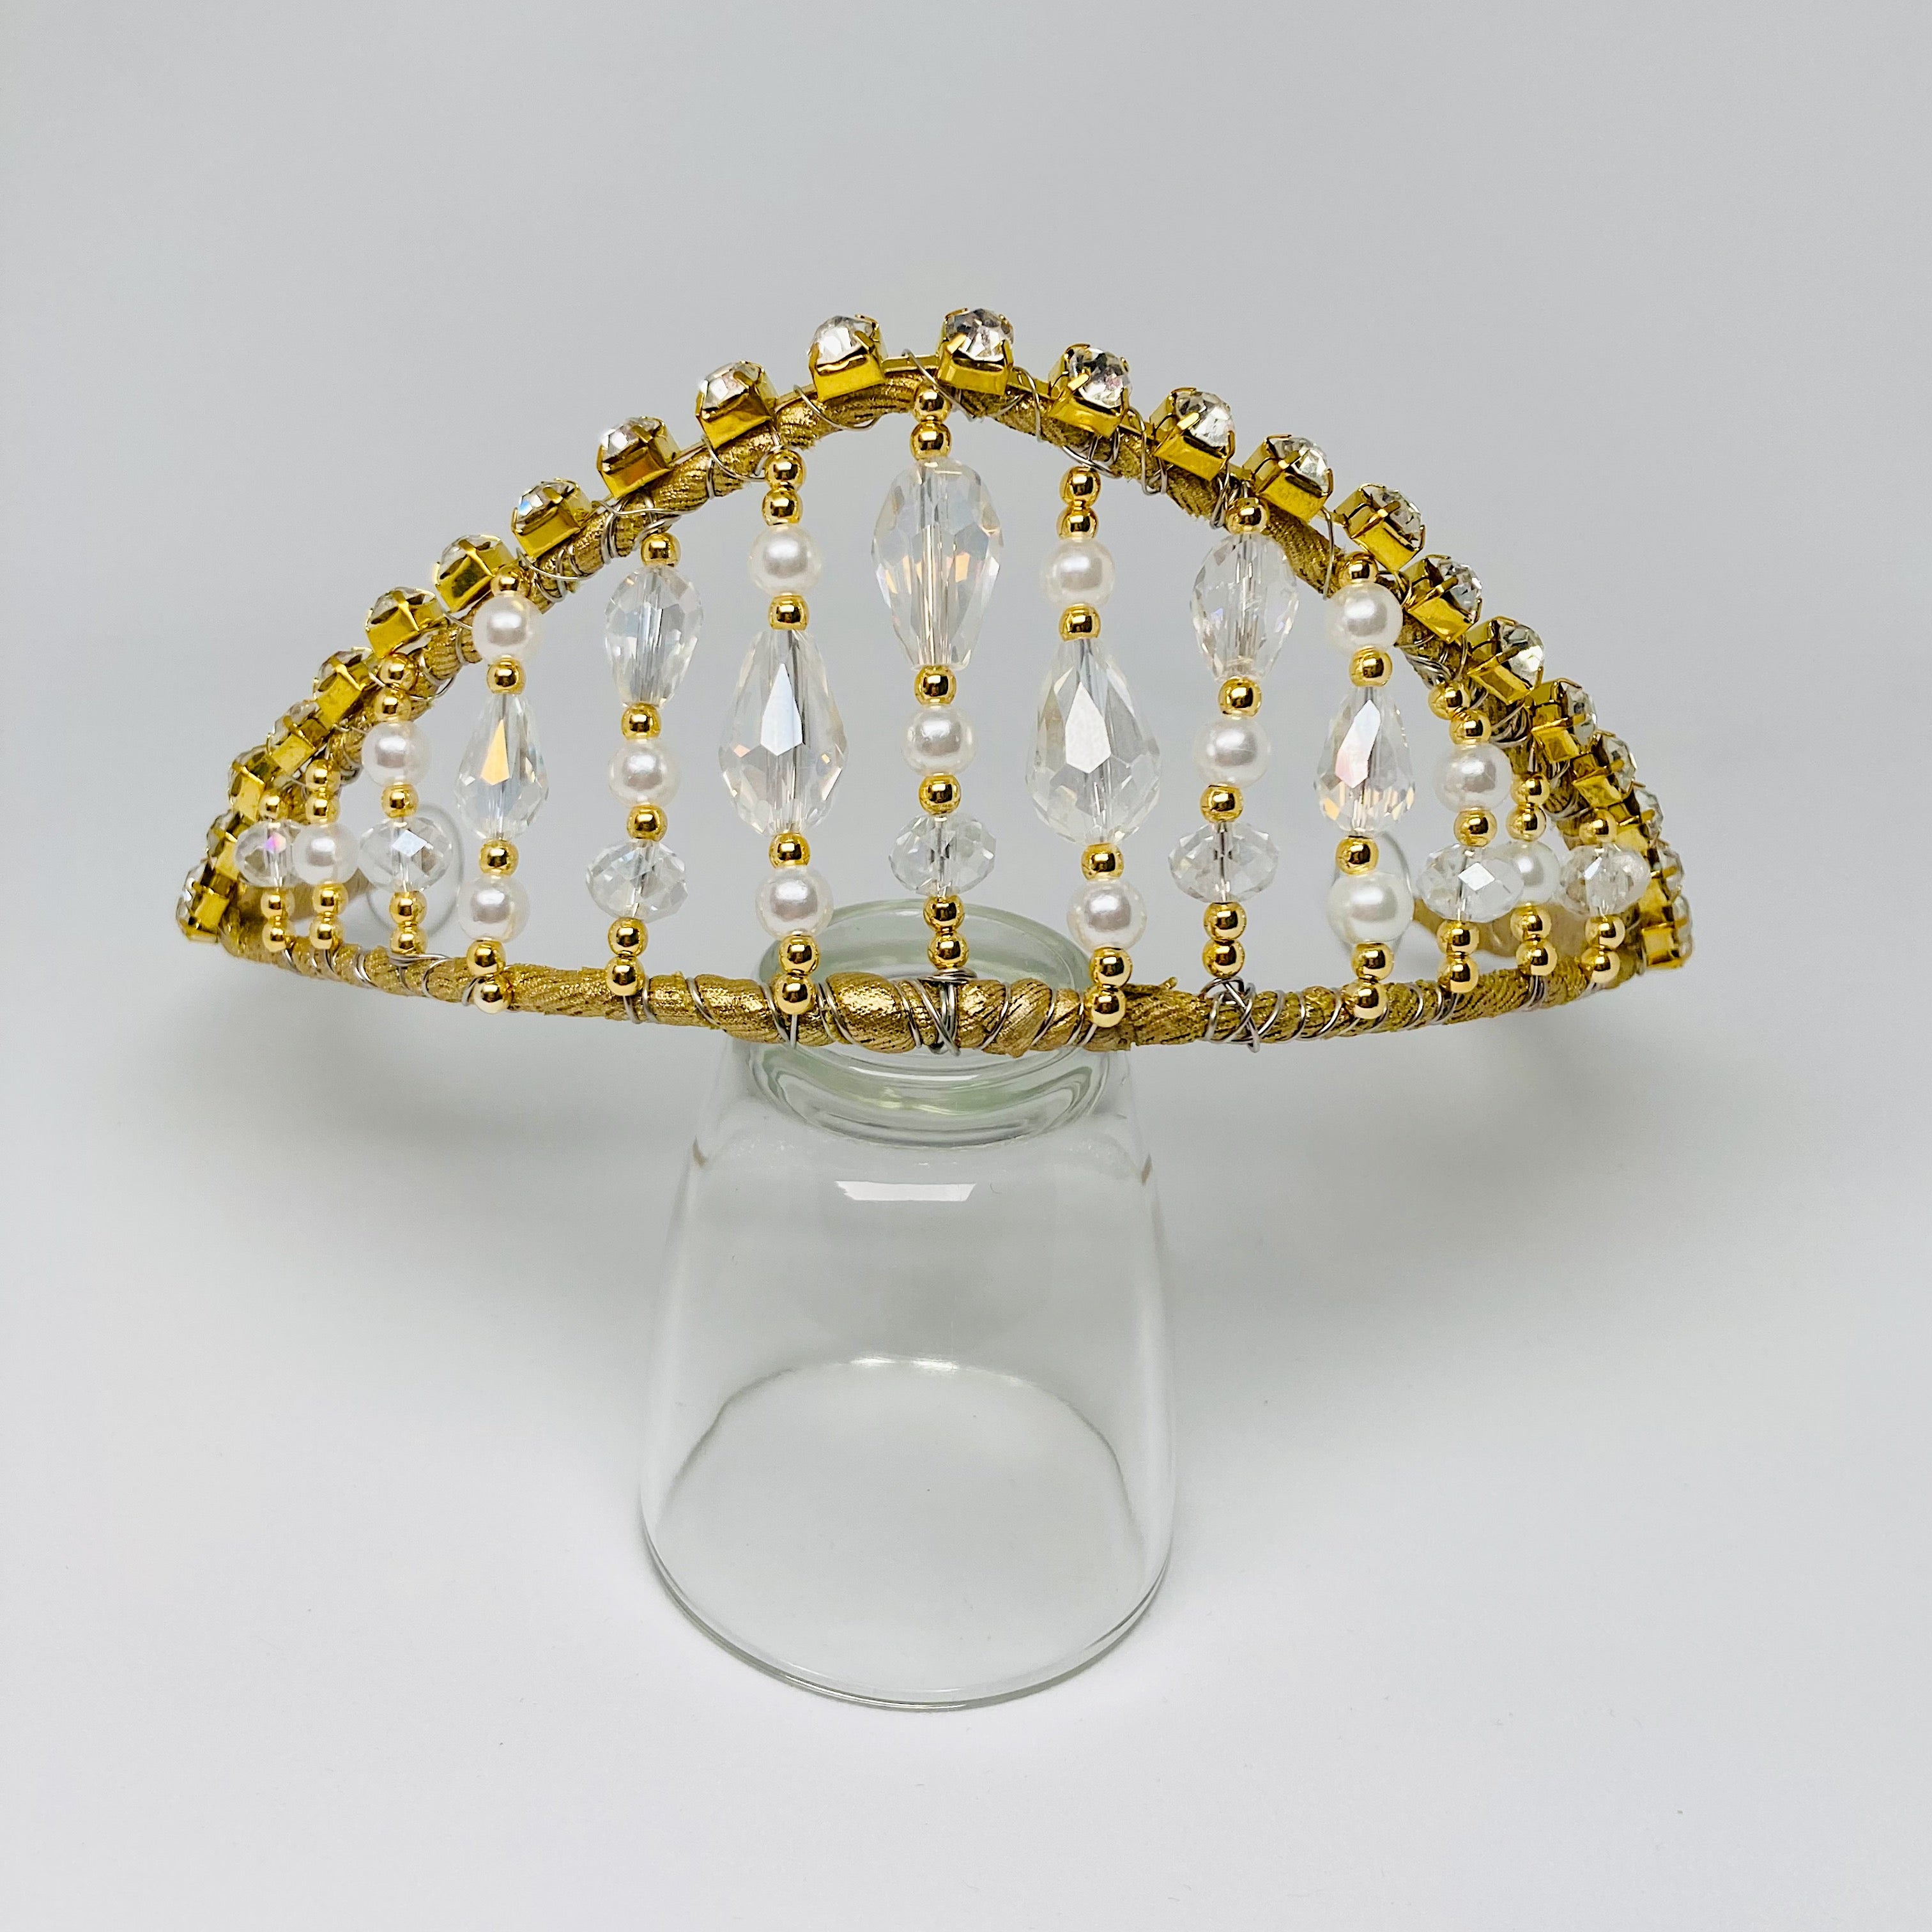 Front view of gold tiara embellished with rhinestones, clear crystals, gold beads and pearls.  The tiara is resting on a clear glass. 